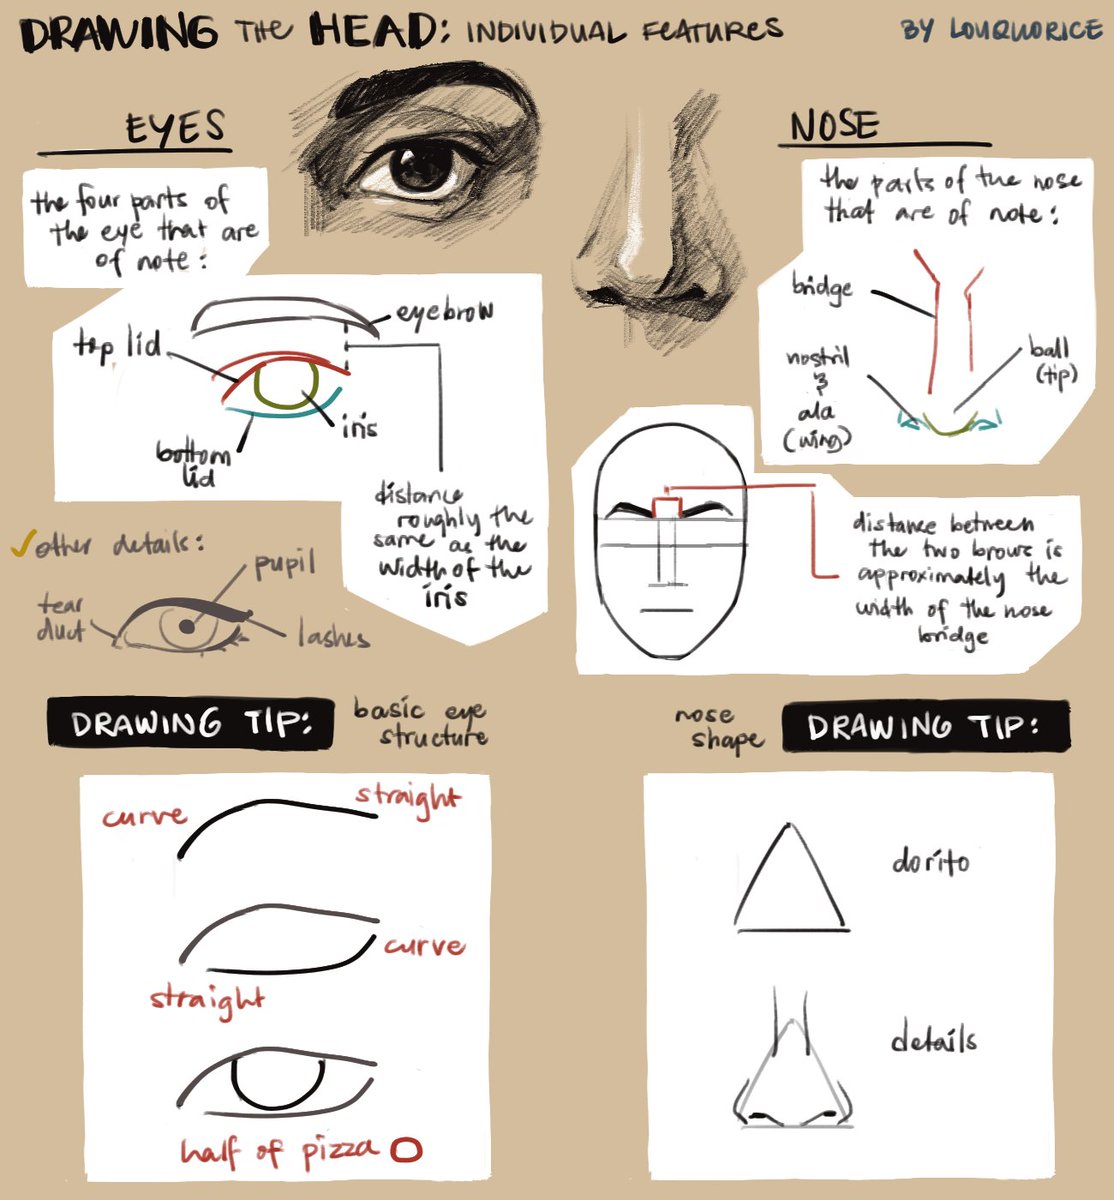 how to draw parts of your face in few, simplified steps
👁️👃👁️👂
      👄 